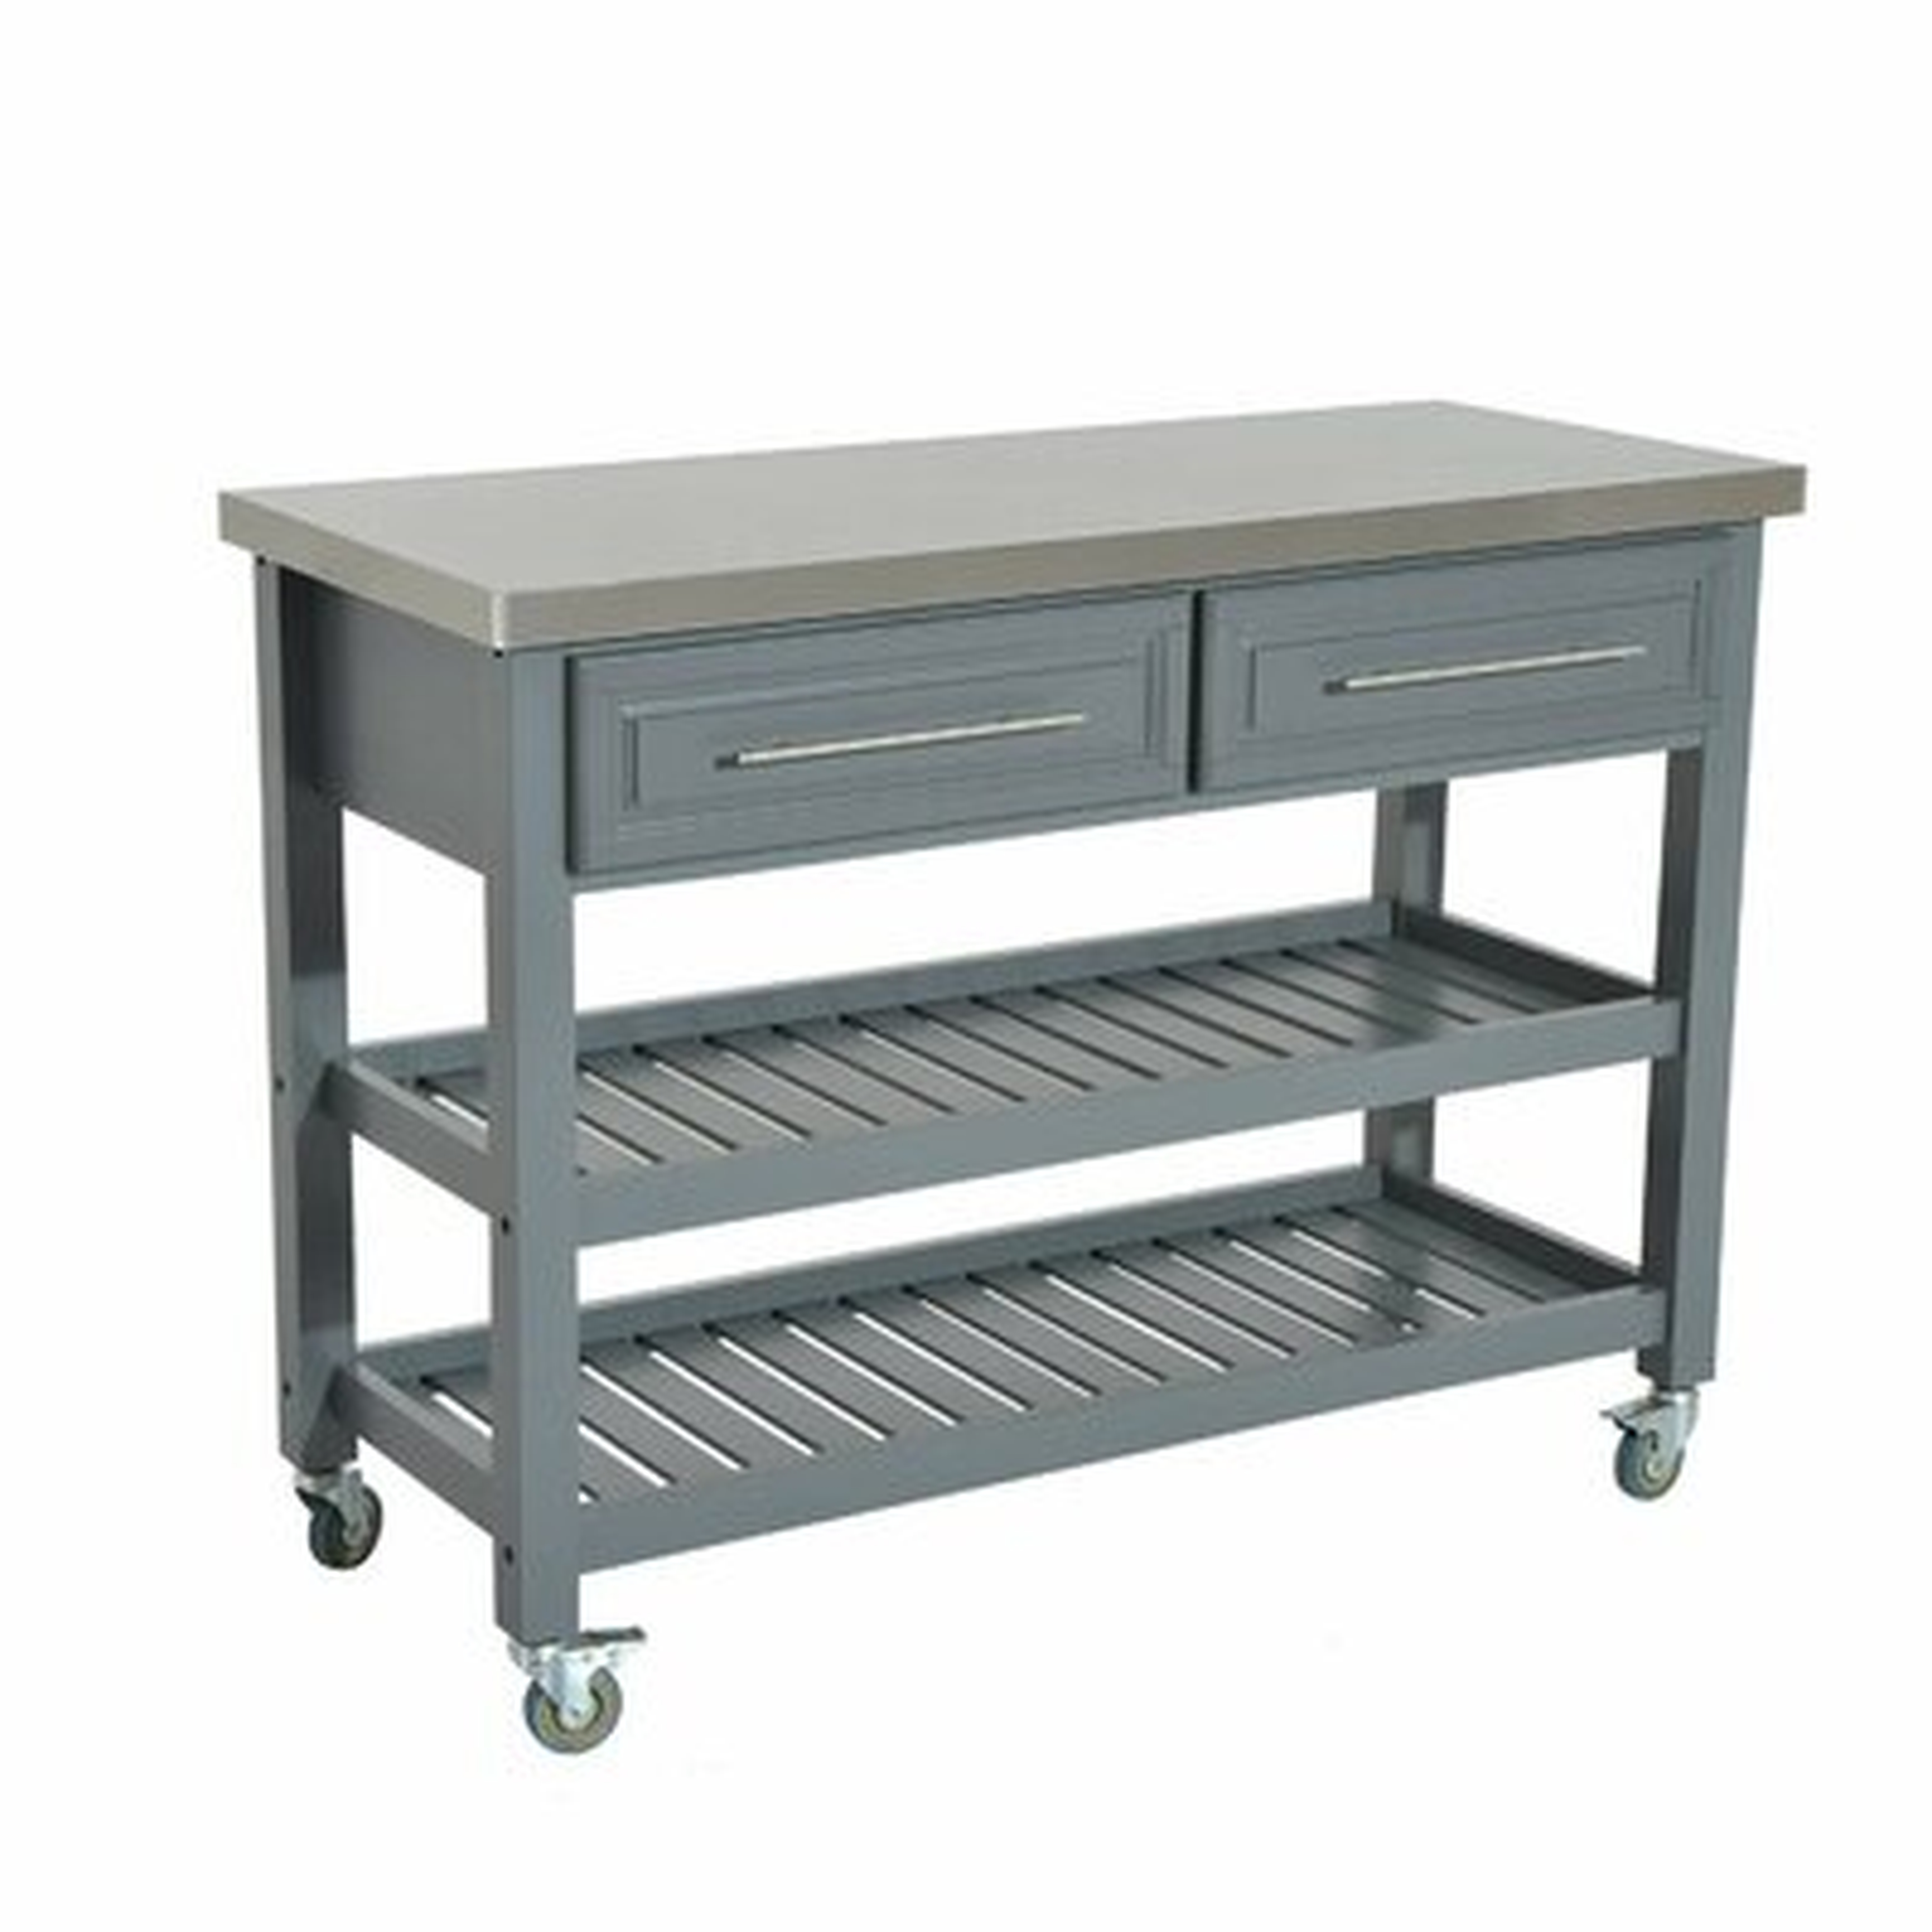 London 3 Tier Kitchen Cart with Stainless Steel Top - AllModern